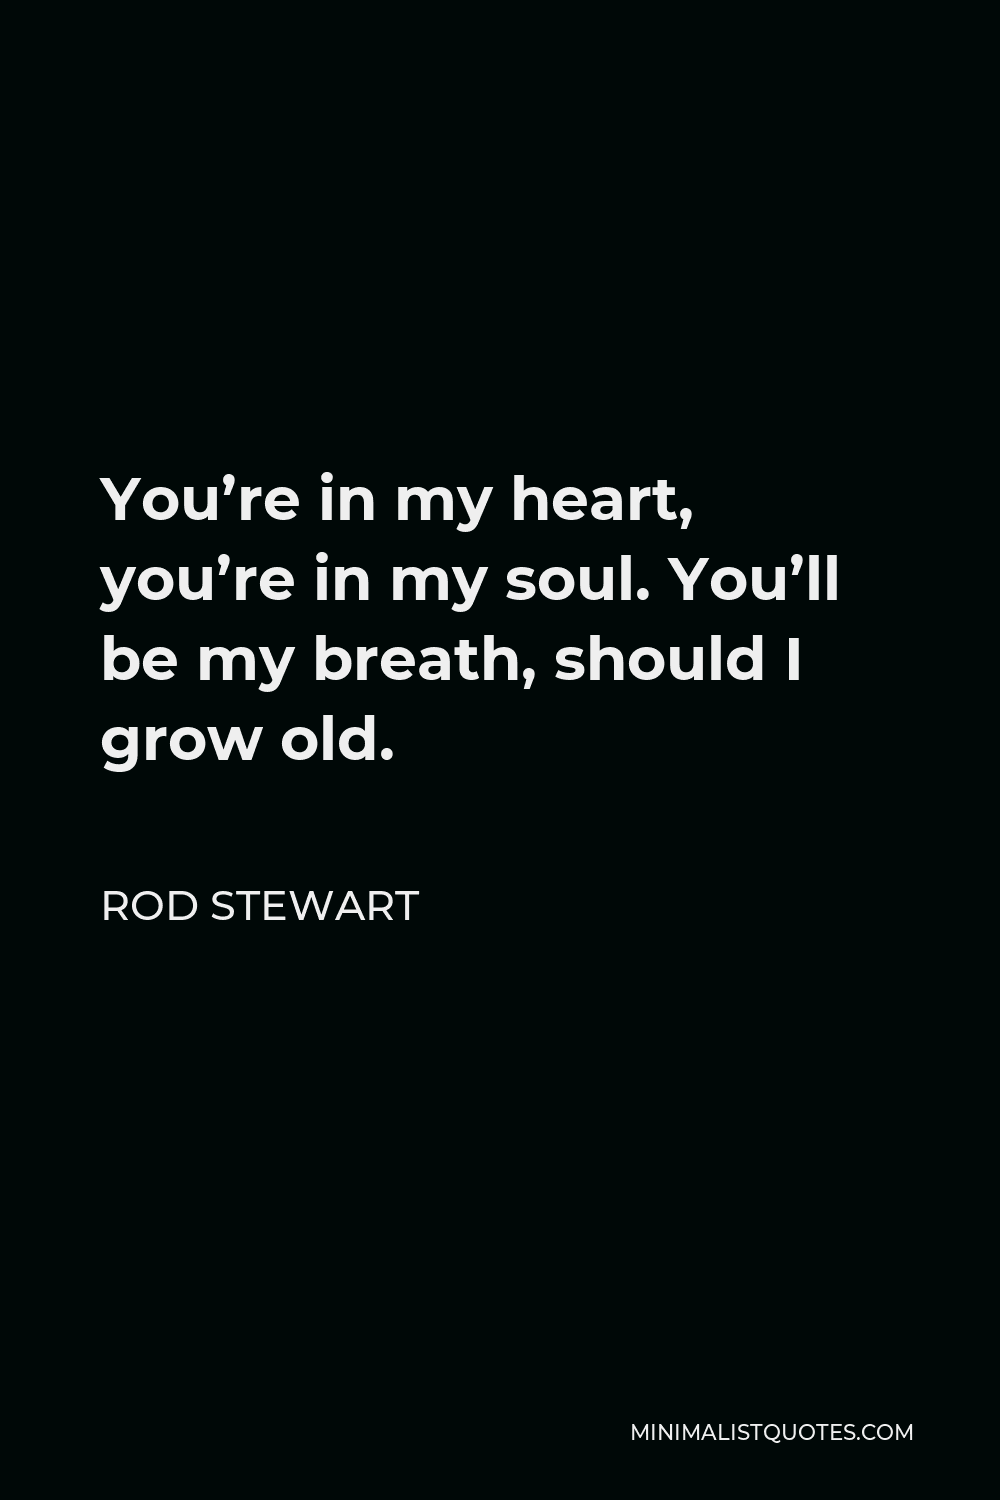 Rod Stewart Quote - You’re in my heart, you’re in my soul. You’ll be my breath, should I grow old.